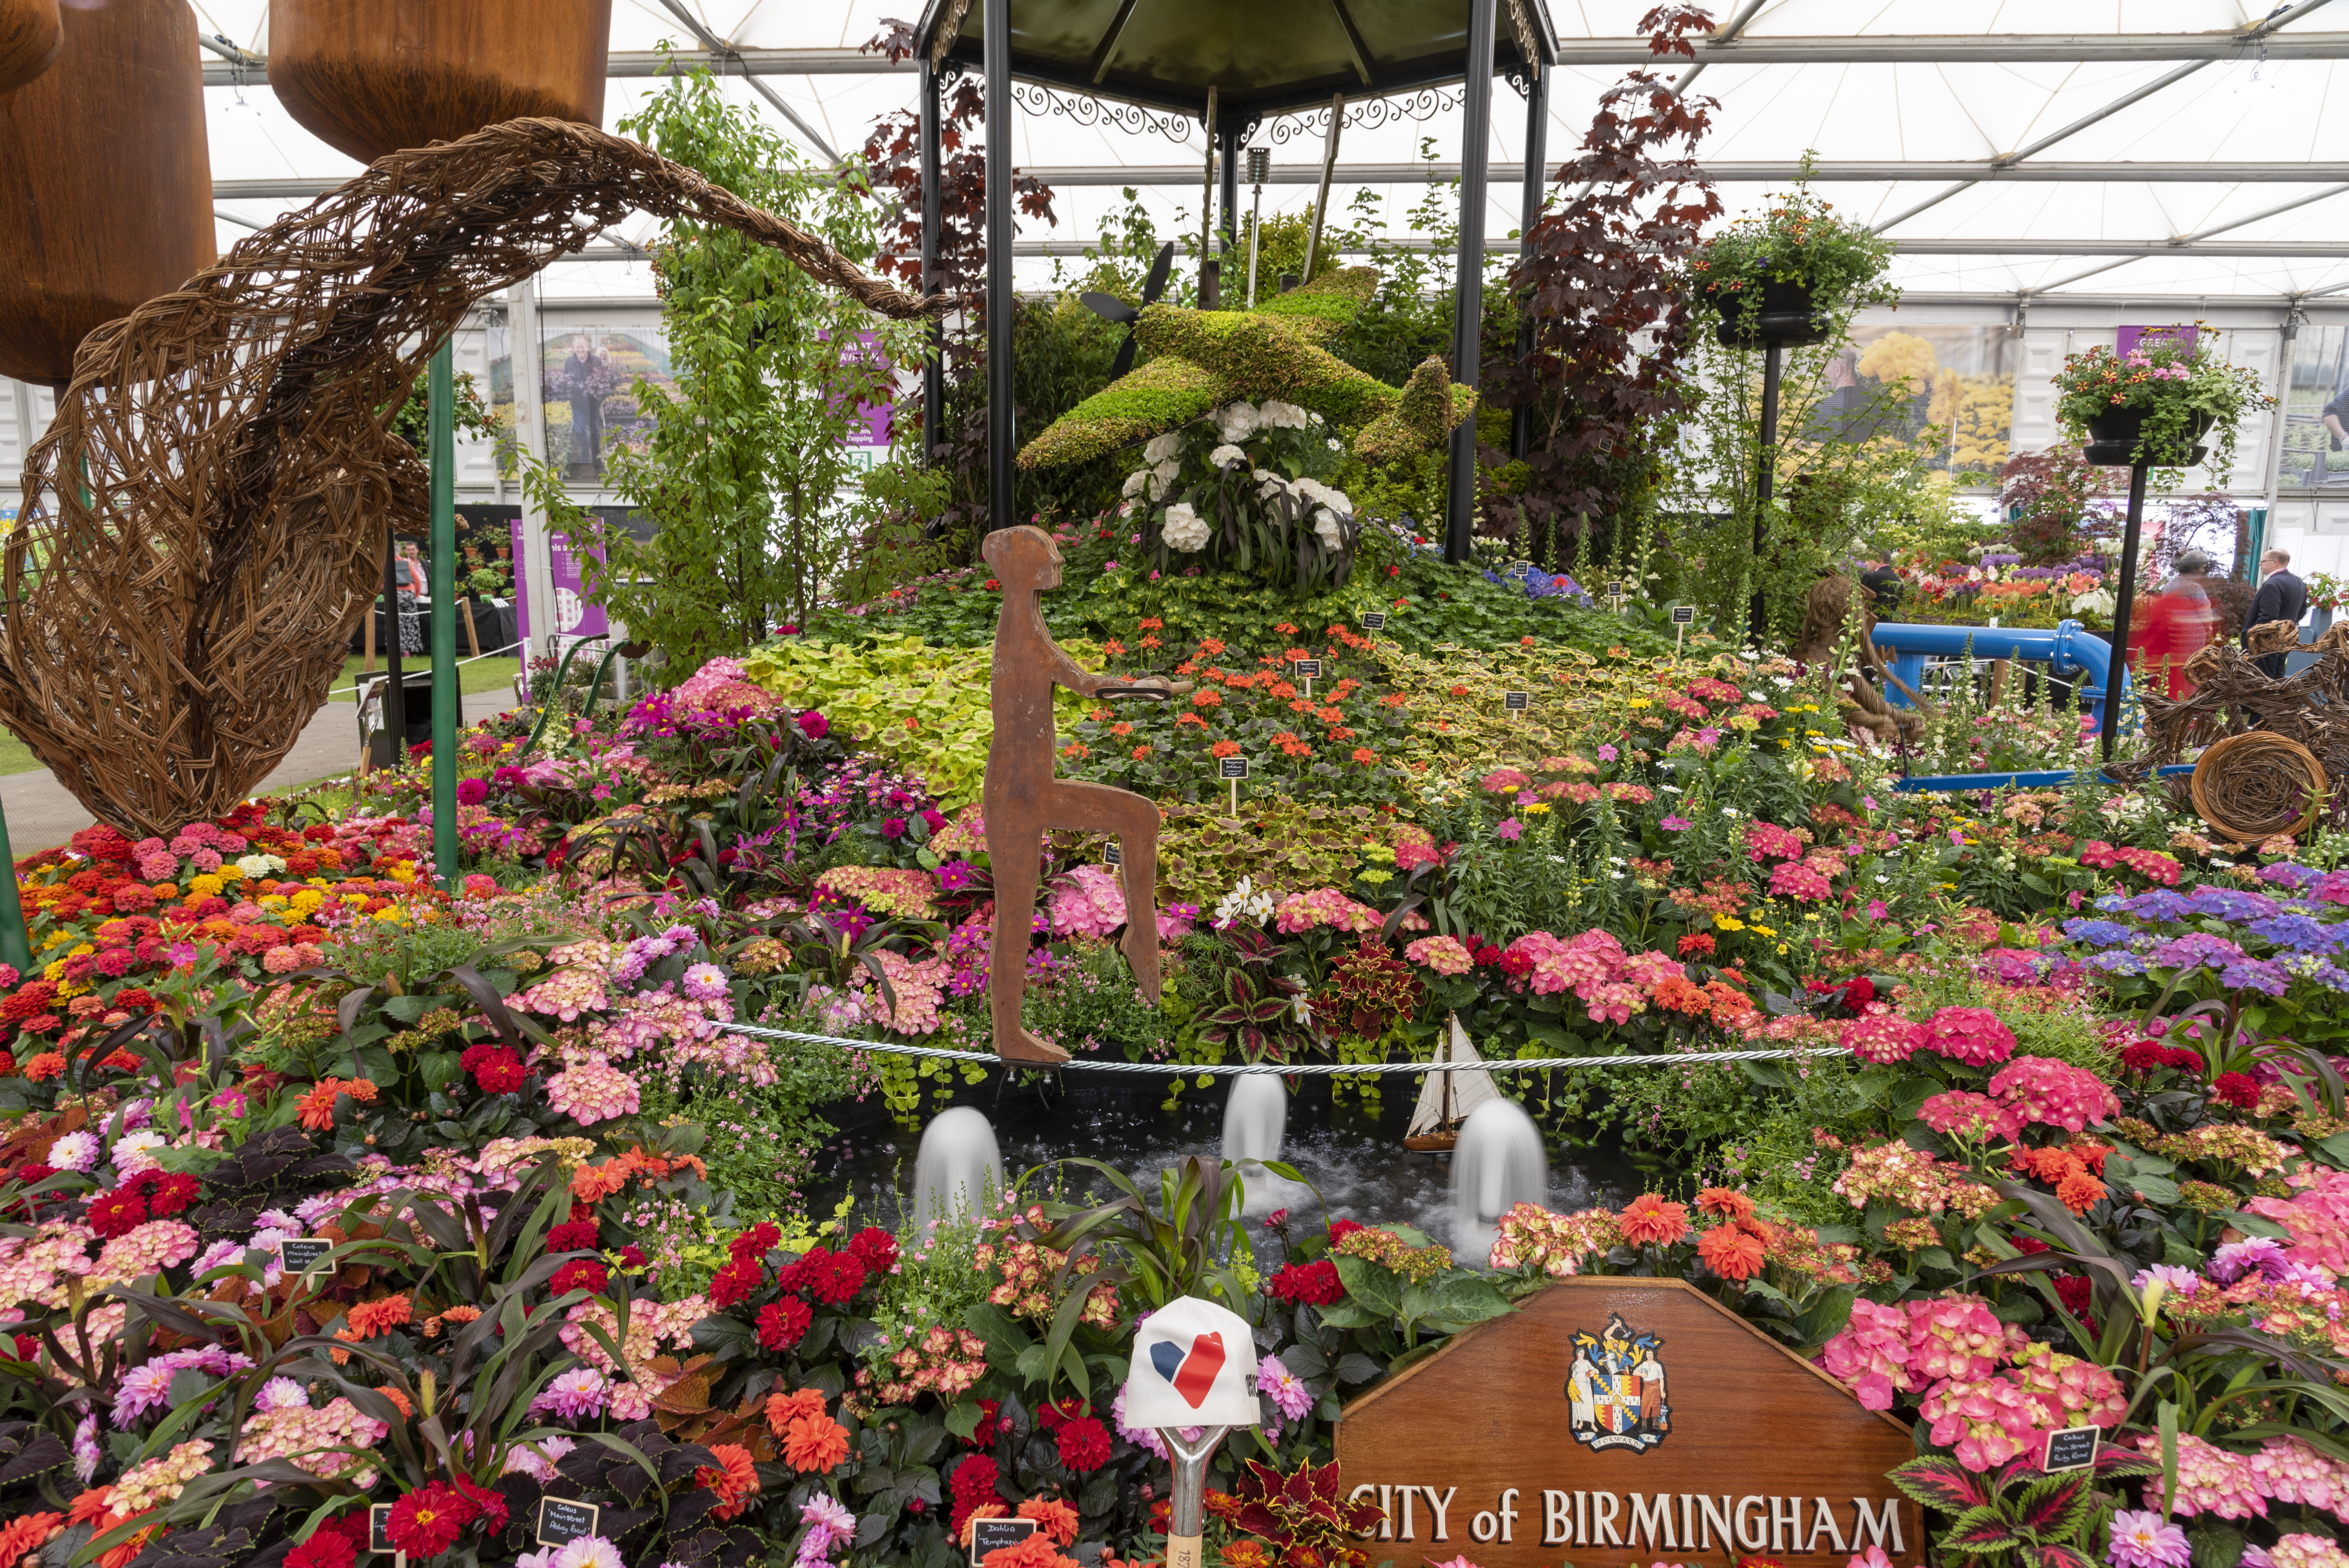 Birmingham Stand - flowers and plant installations surrounding a plaque for the city of Birmingham